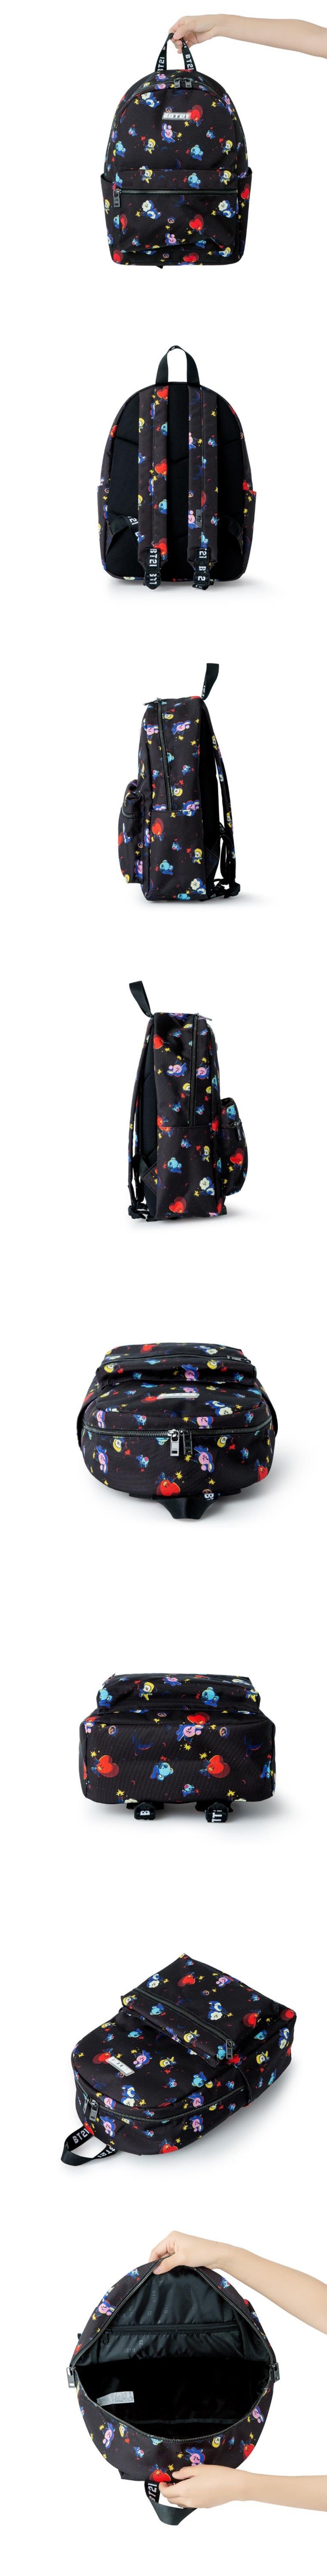 [PREORDER] BT21 - SPACE SQUAD PATTERN BACKPACK